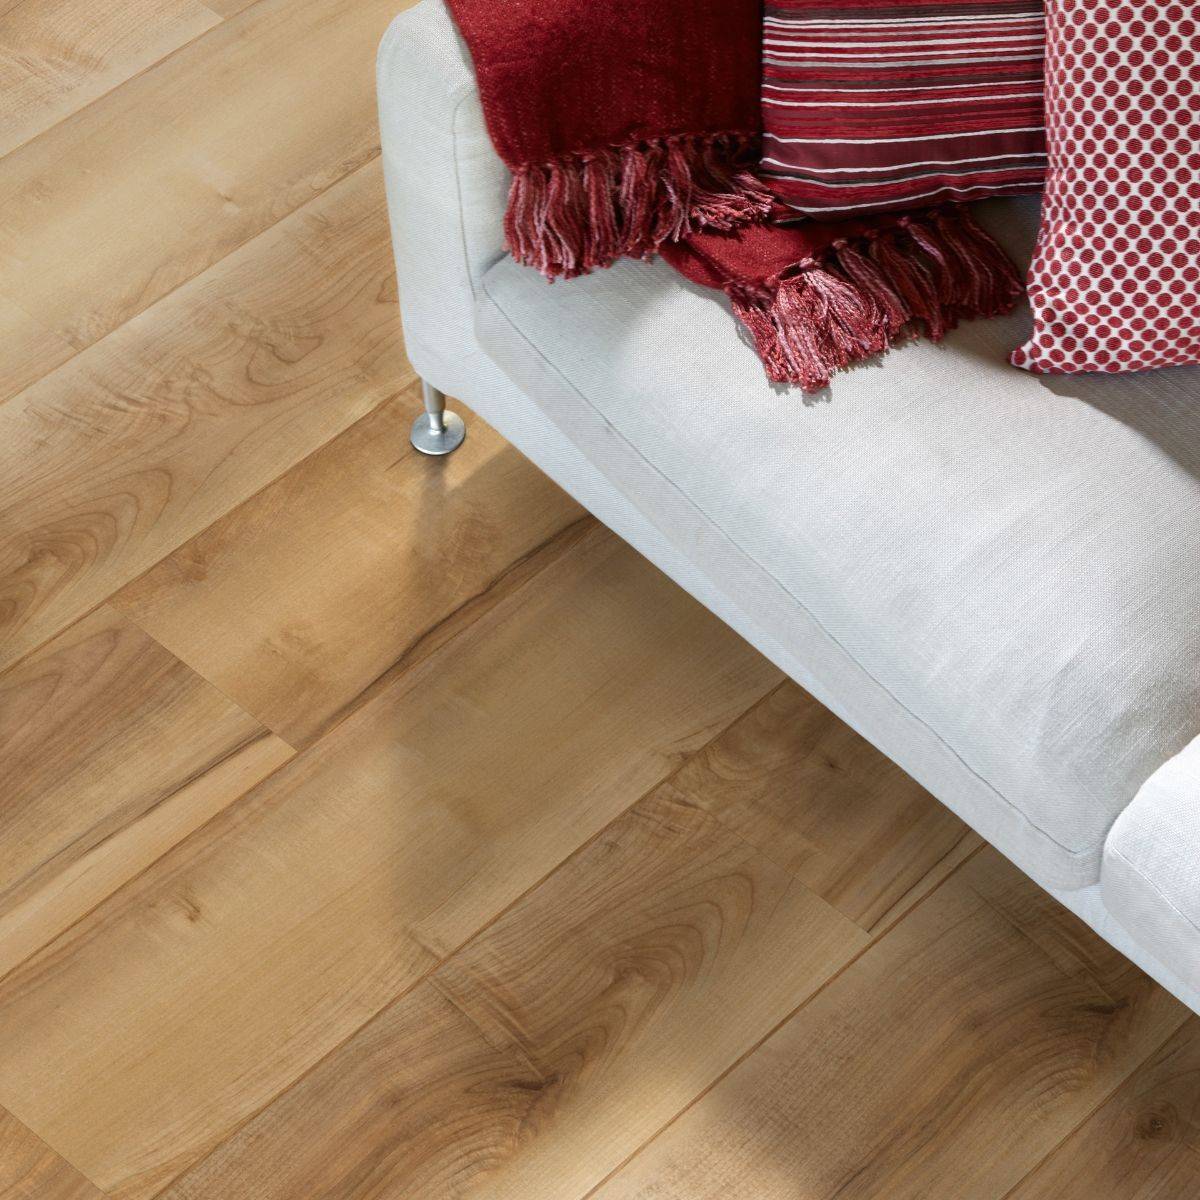 Polyflor Colonia Wood Oxford Maple 4431